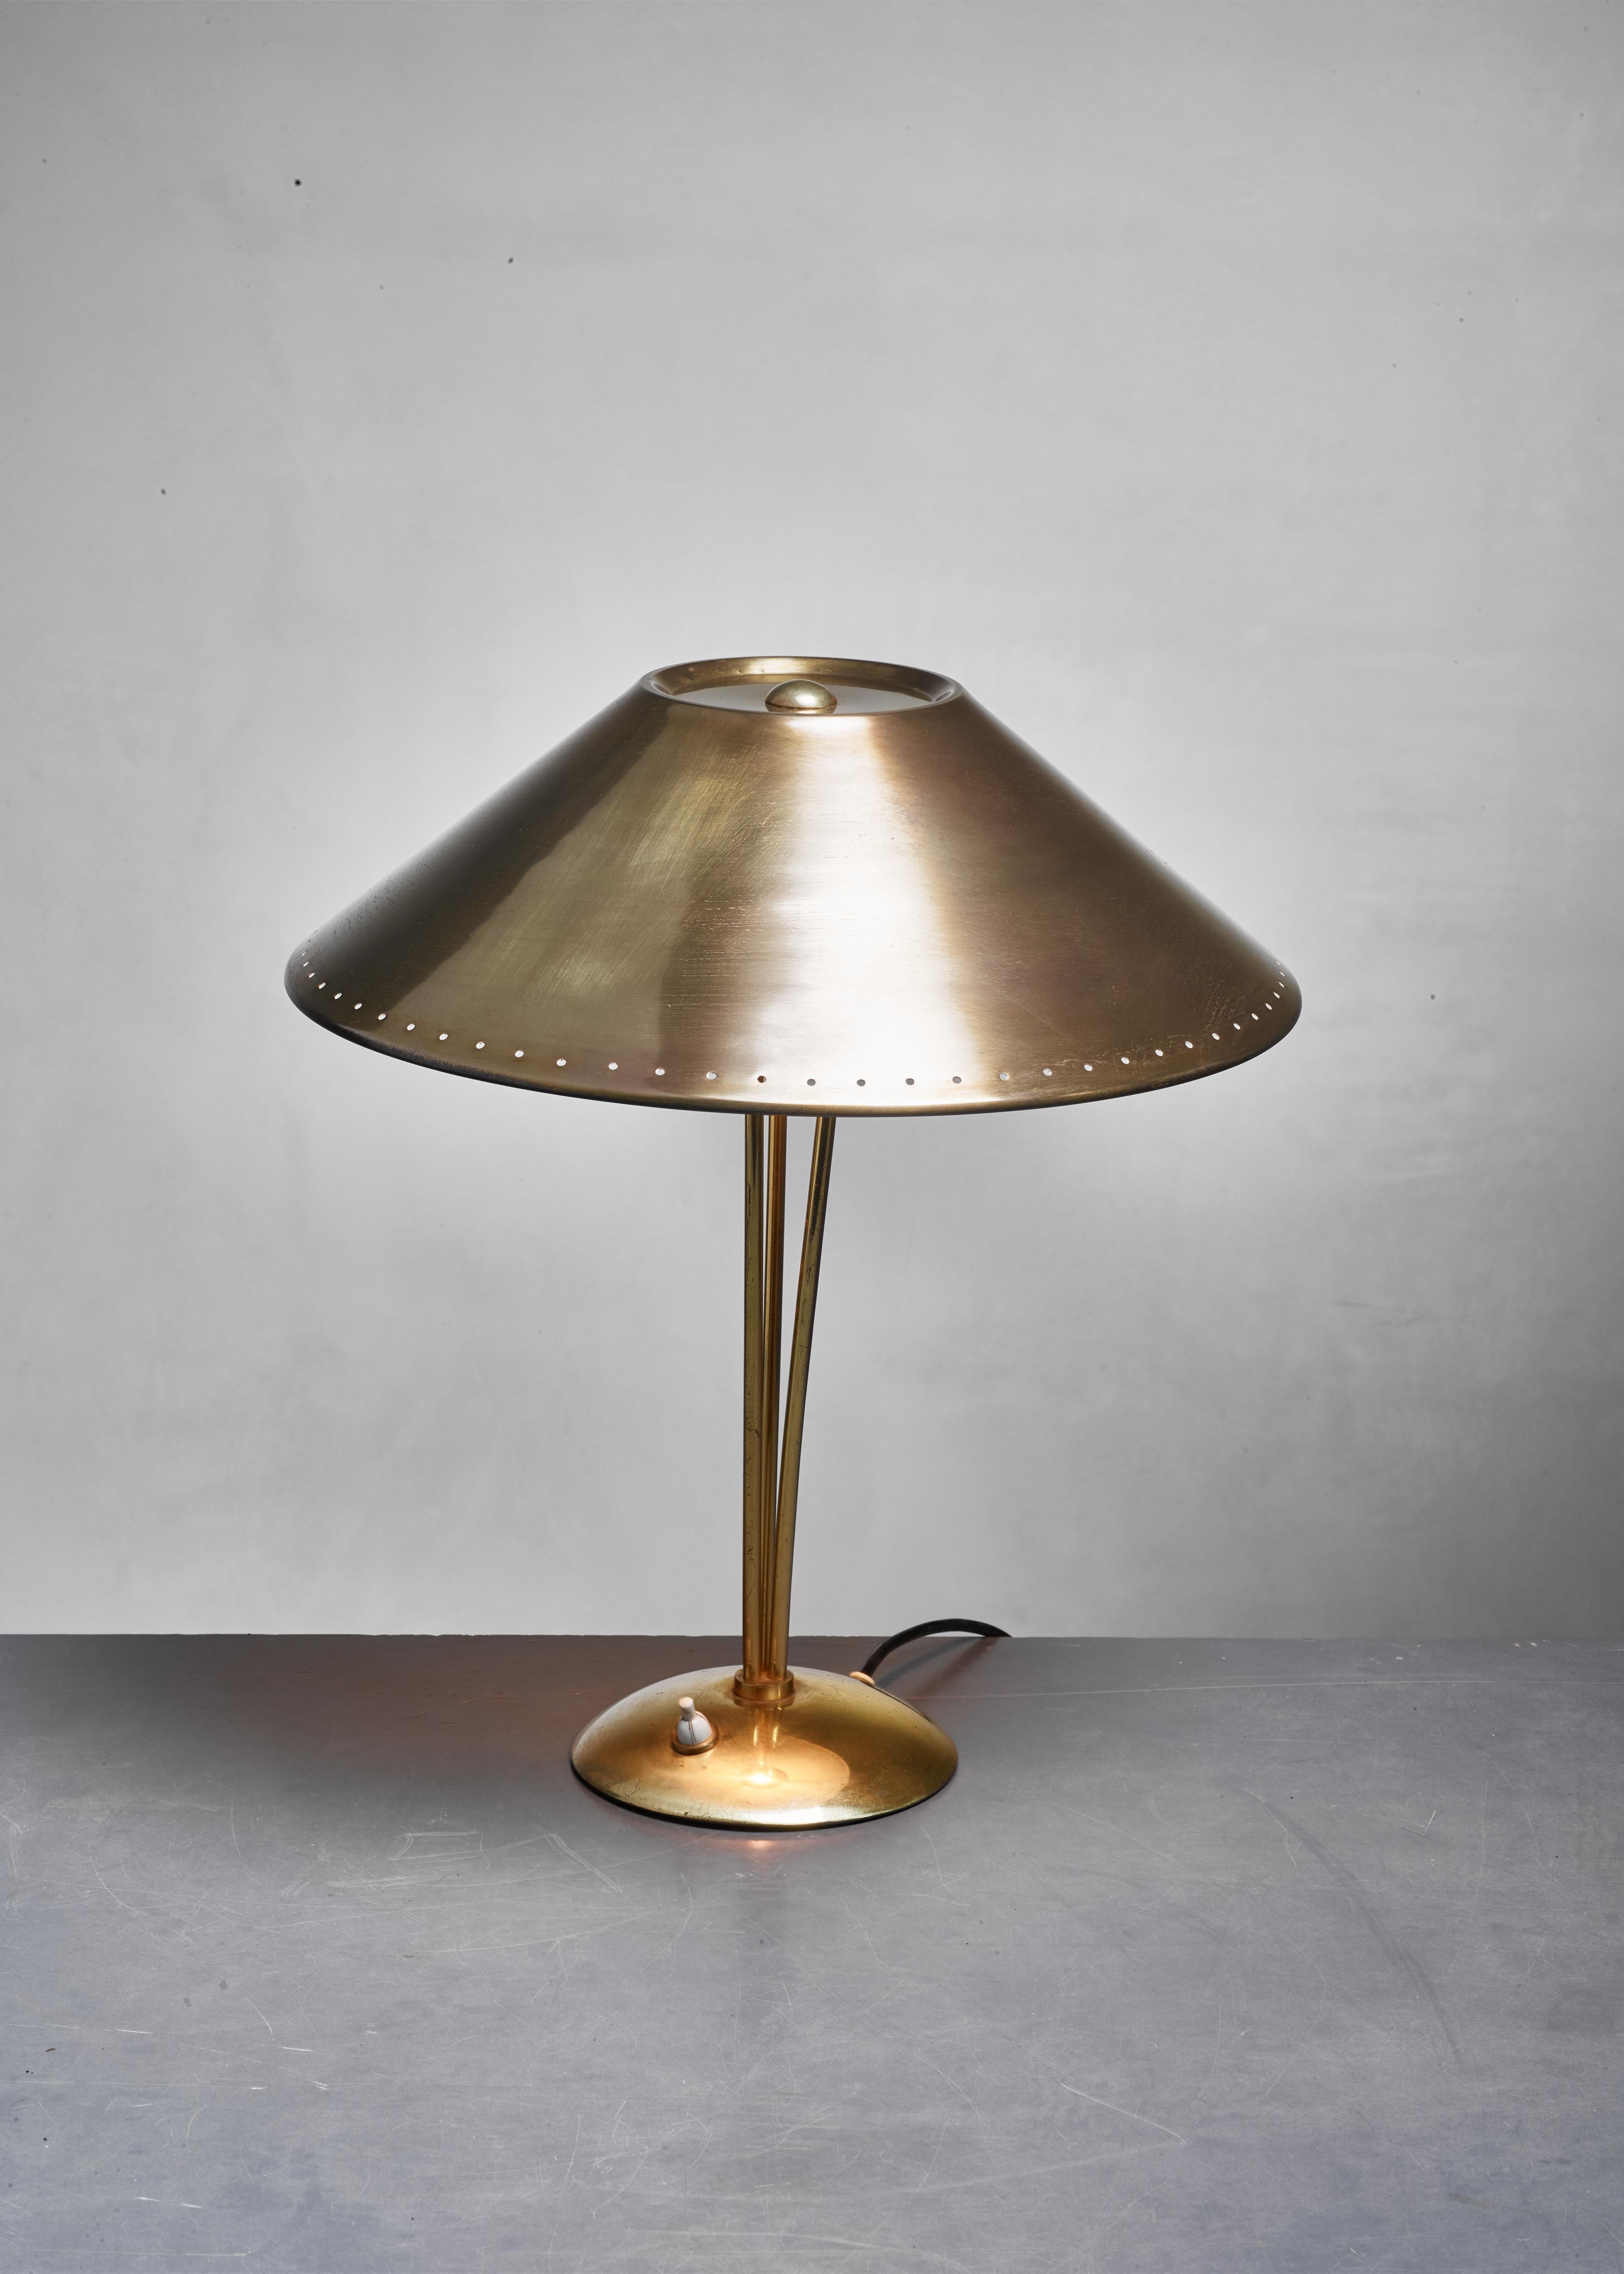 An elegant and simple solid brass table lamp with a beautiful mild aging. The inner side of the hood is off-white, giving a warm radiance.